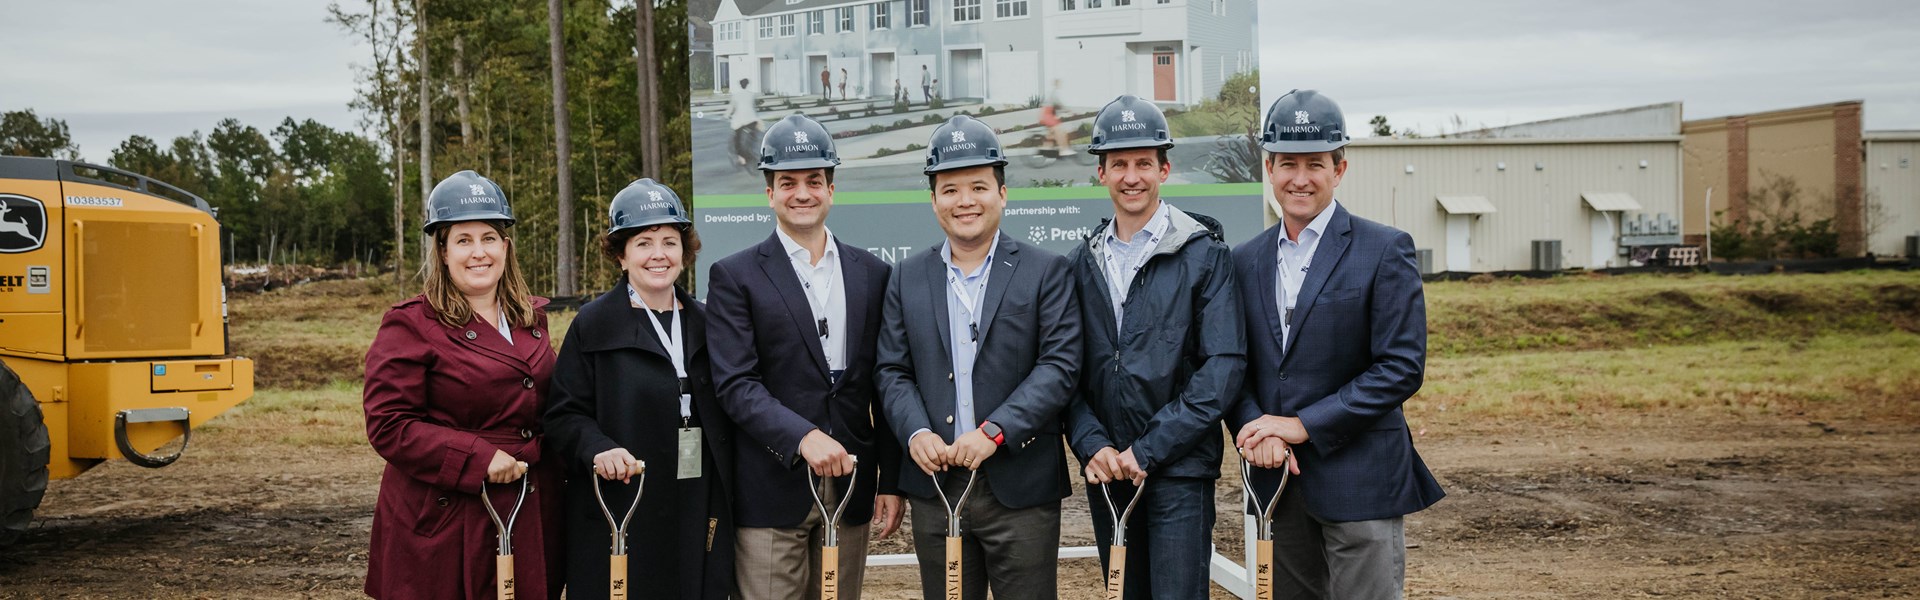 Crescent Communities Celebrates Groundbreaking of First Build-to-Rent Community